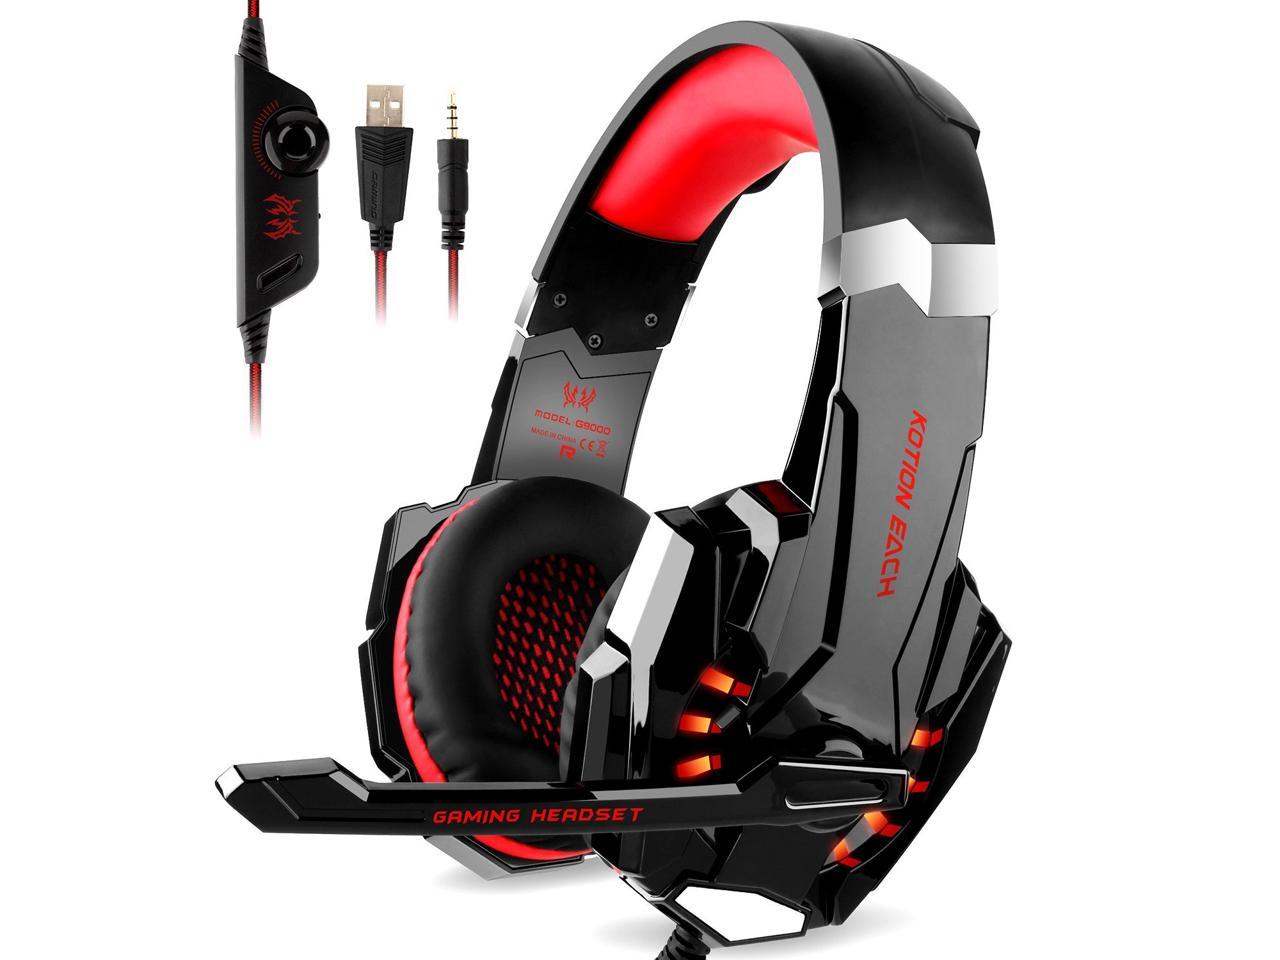 Kotion Each G9000 Stereo Gaming Headset For Ps4 Pc Xbox One Controller Noise Cancelling Over Ear Headphones With Mic Soft Memory Earmuffs For Laptop Mac Nintendo Switch Games Red Newegg Com